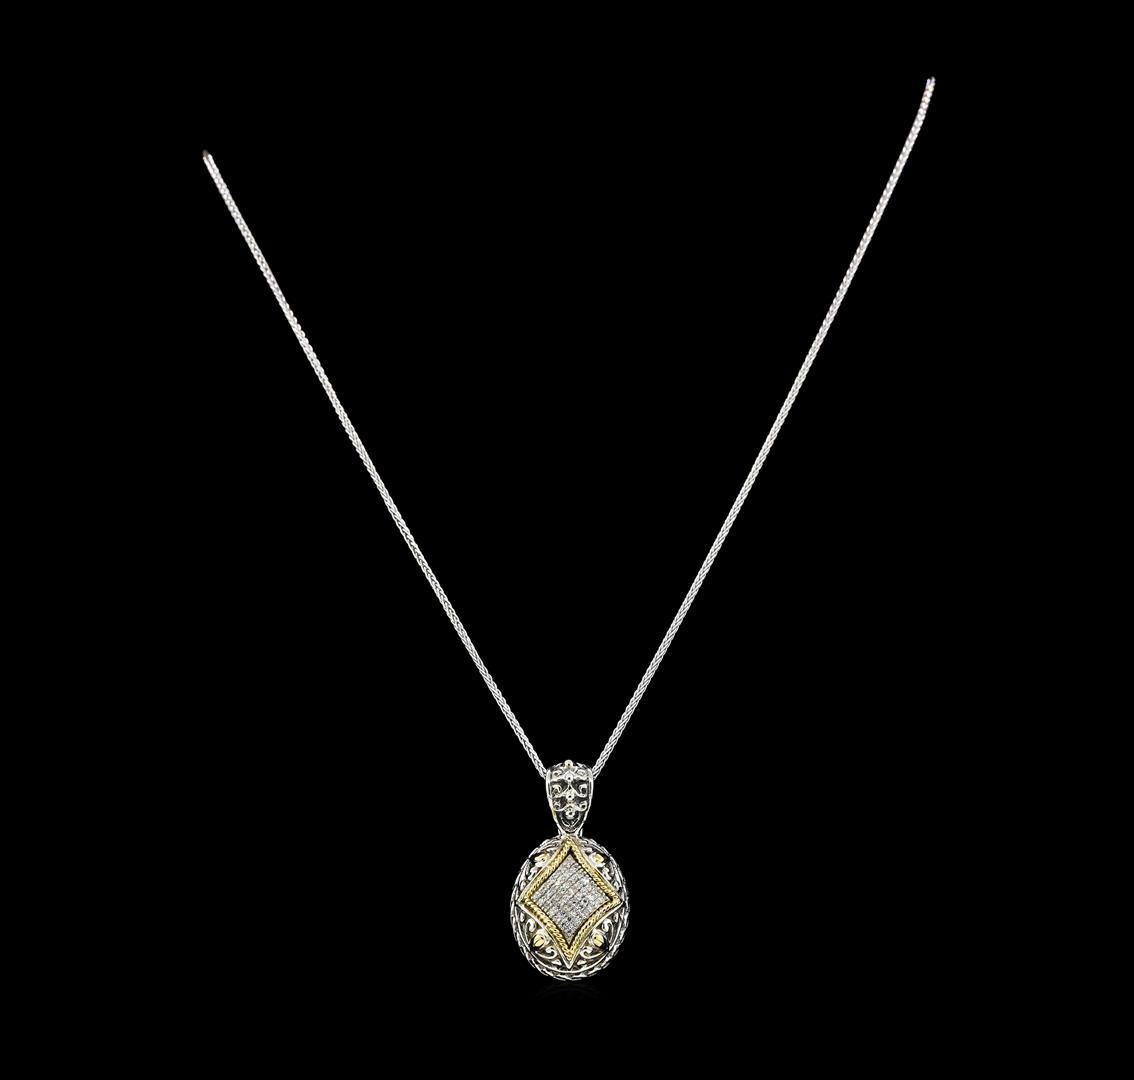 0.25 ctw Diamond Pendant and Chain - Silver/18KT Yellow Gold